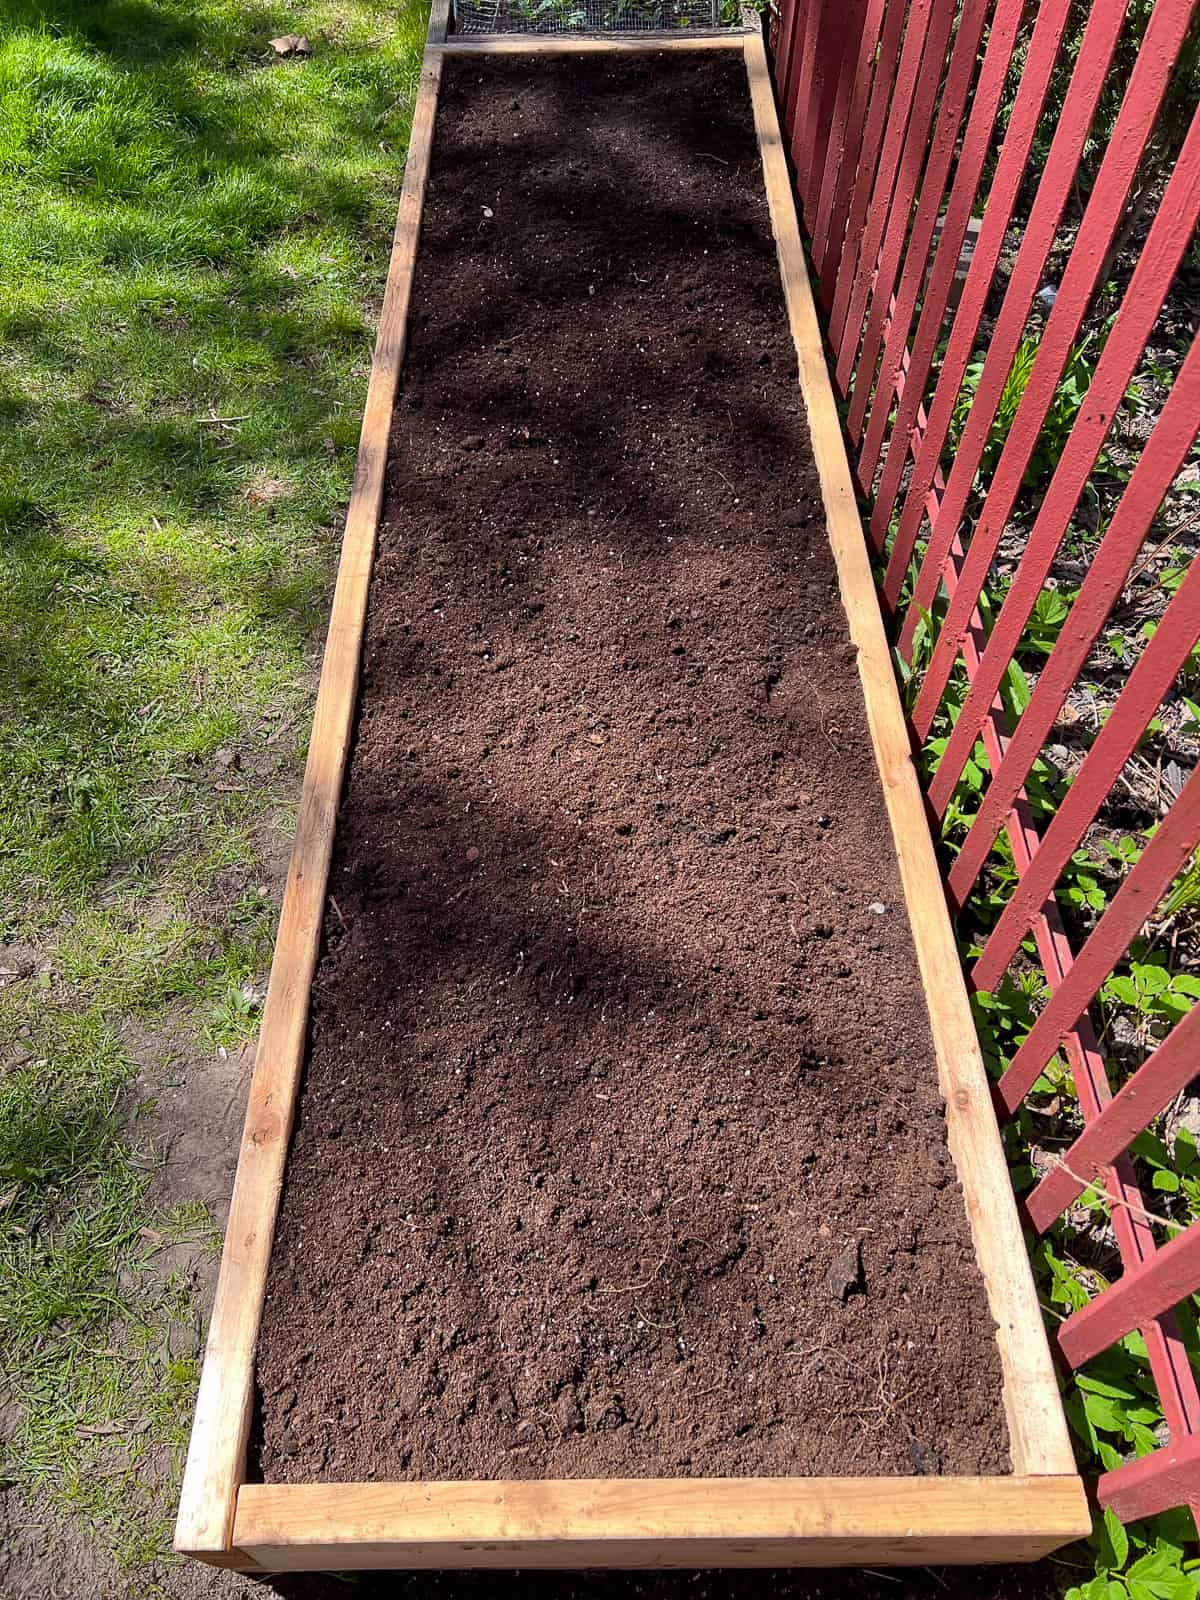 An image of a raised bed filled with soil.